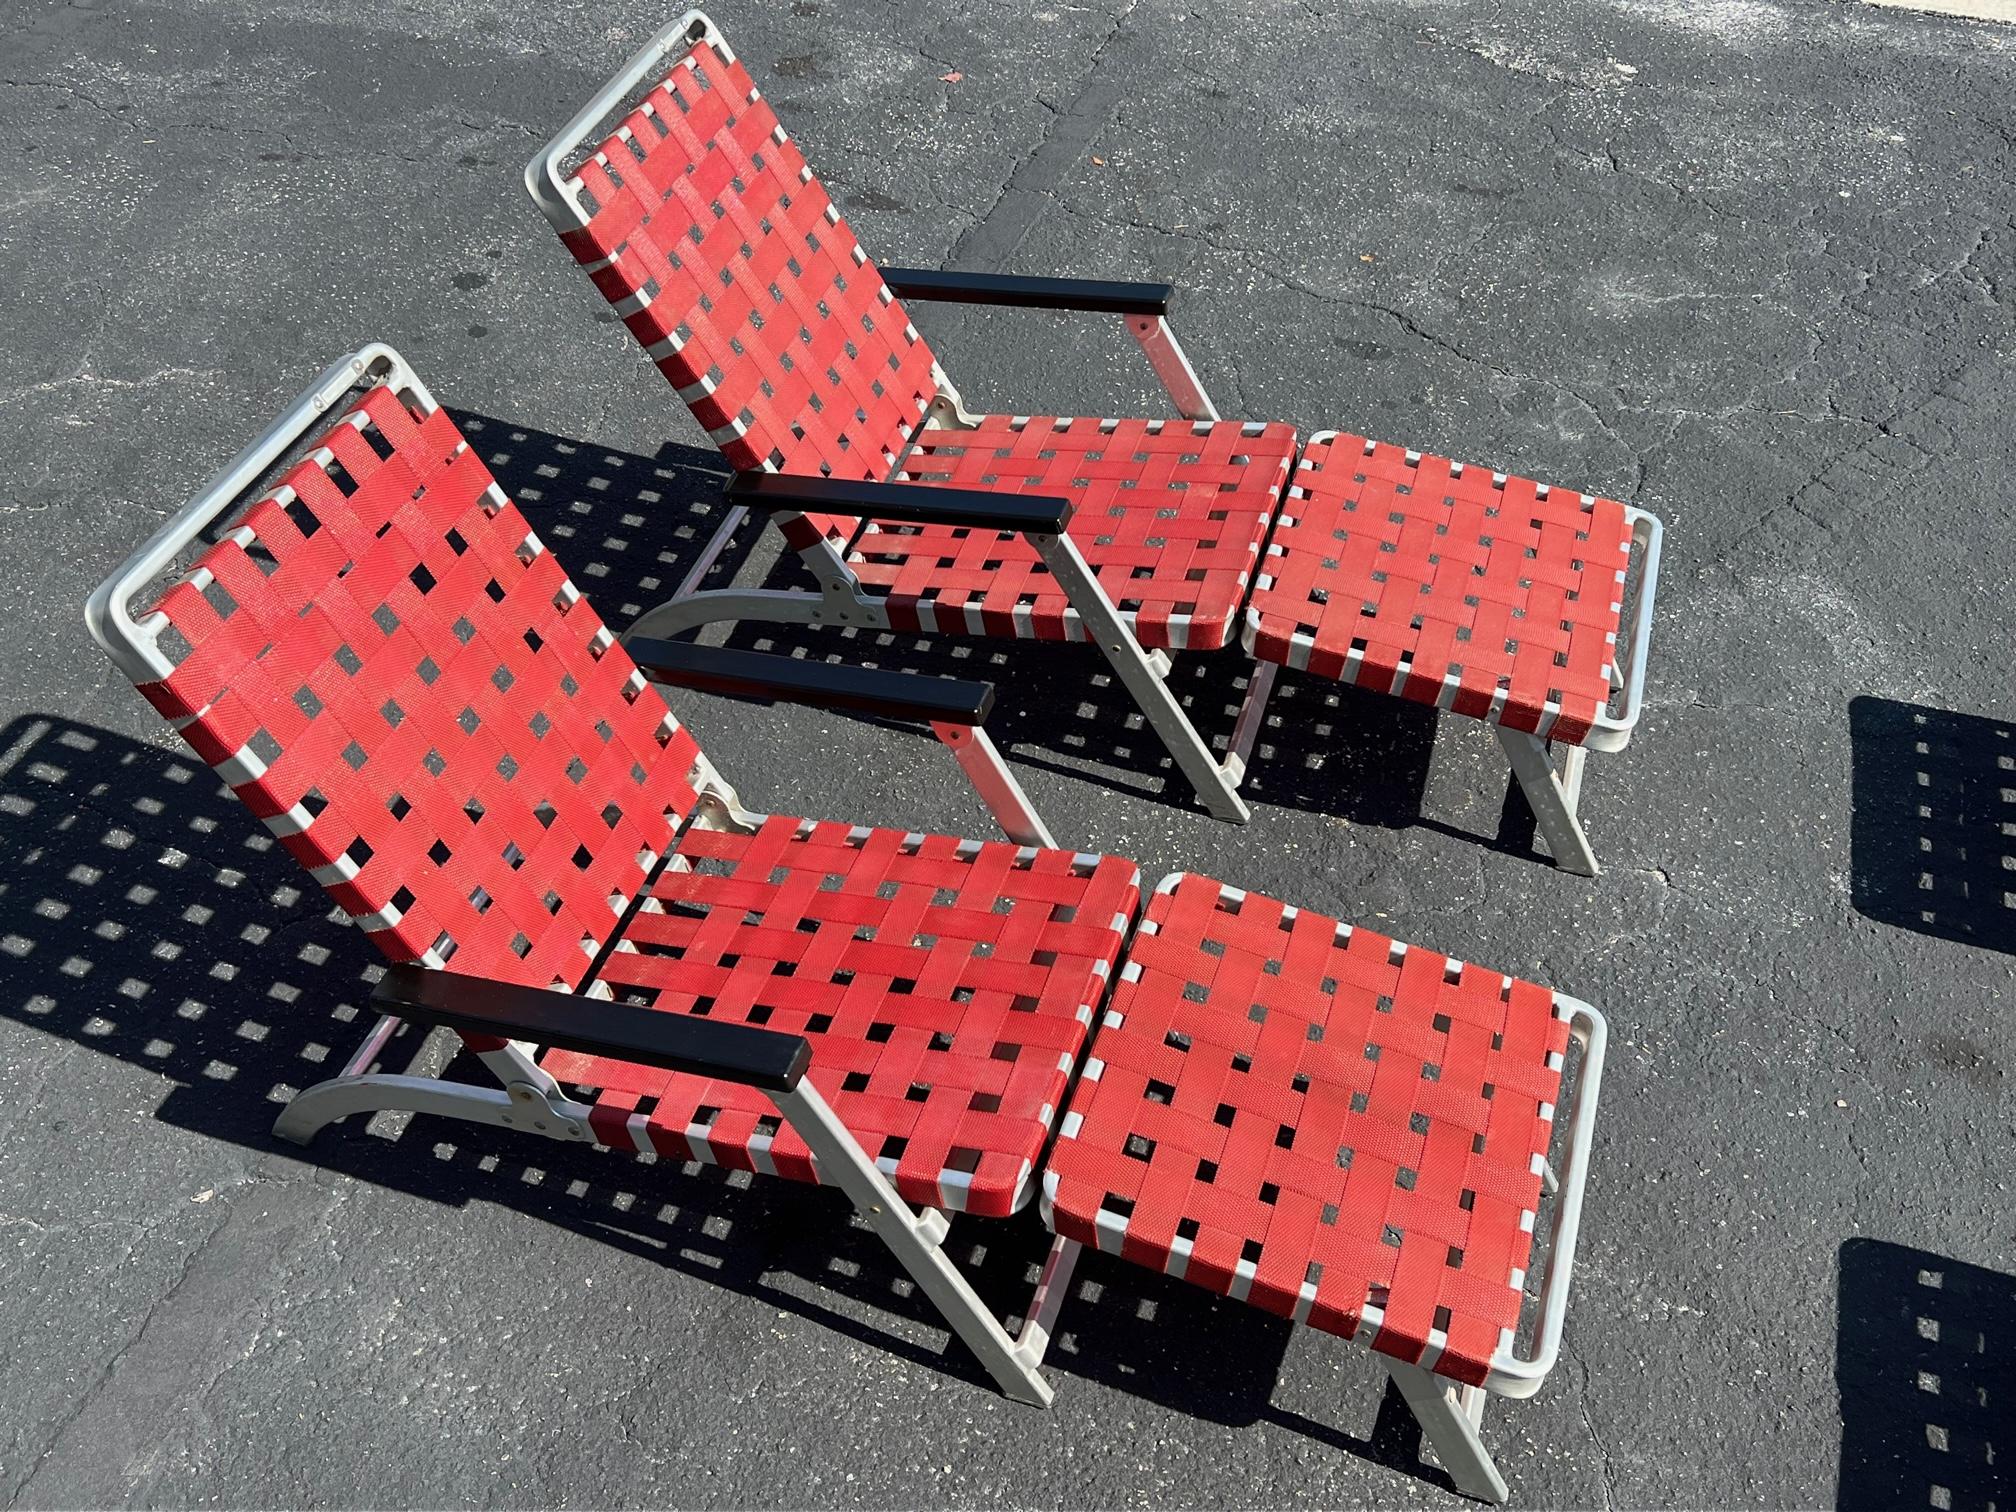 A Pair of Aluminum Folding Chaise Lounges from SS United States Luxury Ship For Sale 13